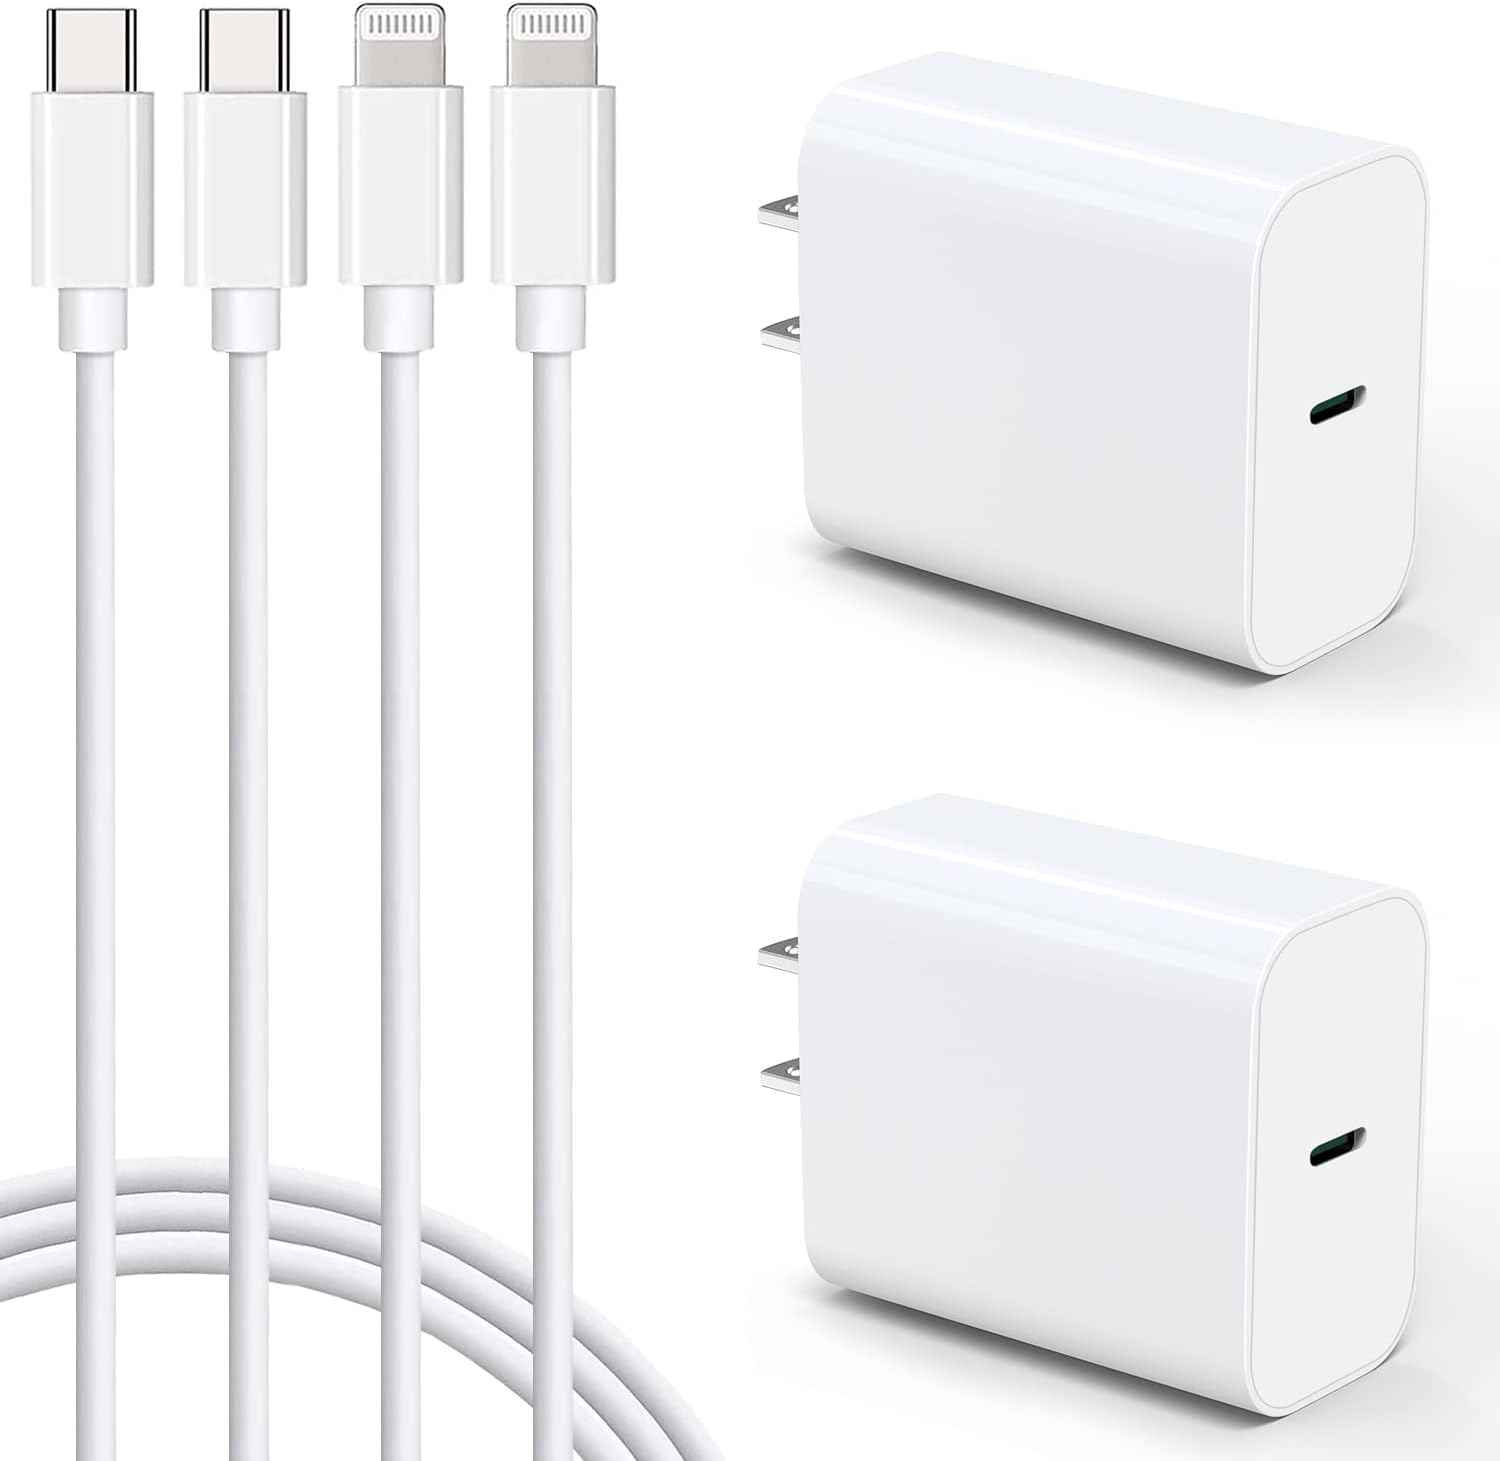 Mitesbony Iphone Fast Charger 10 Ft [Apple Mfi Certified] 2 Pack Pd 20W Usb C Charger Block With 10Ft Long Type C Lightning Cable For Iphone 14 13 12 11 Xs Xr X 8 Ipad,White